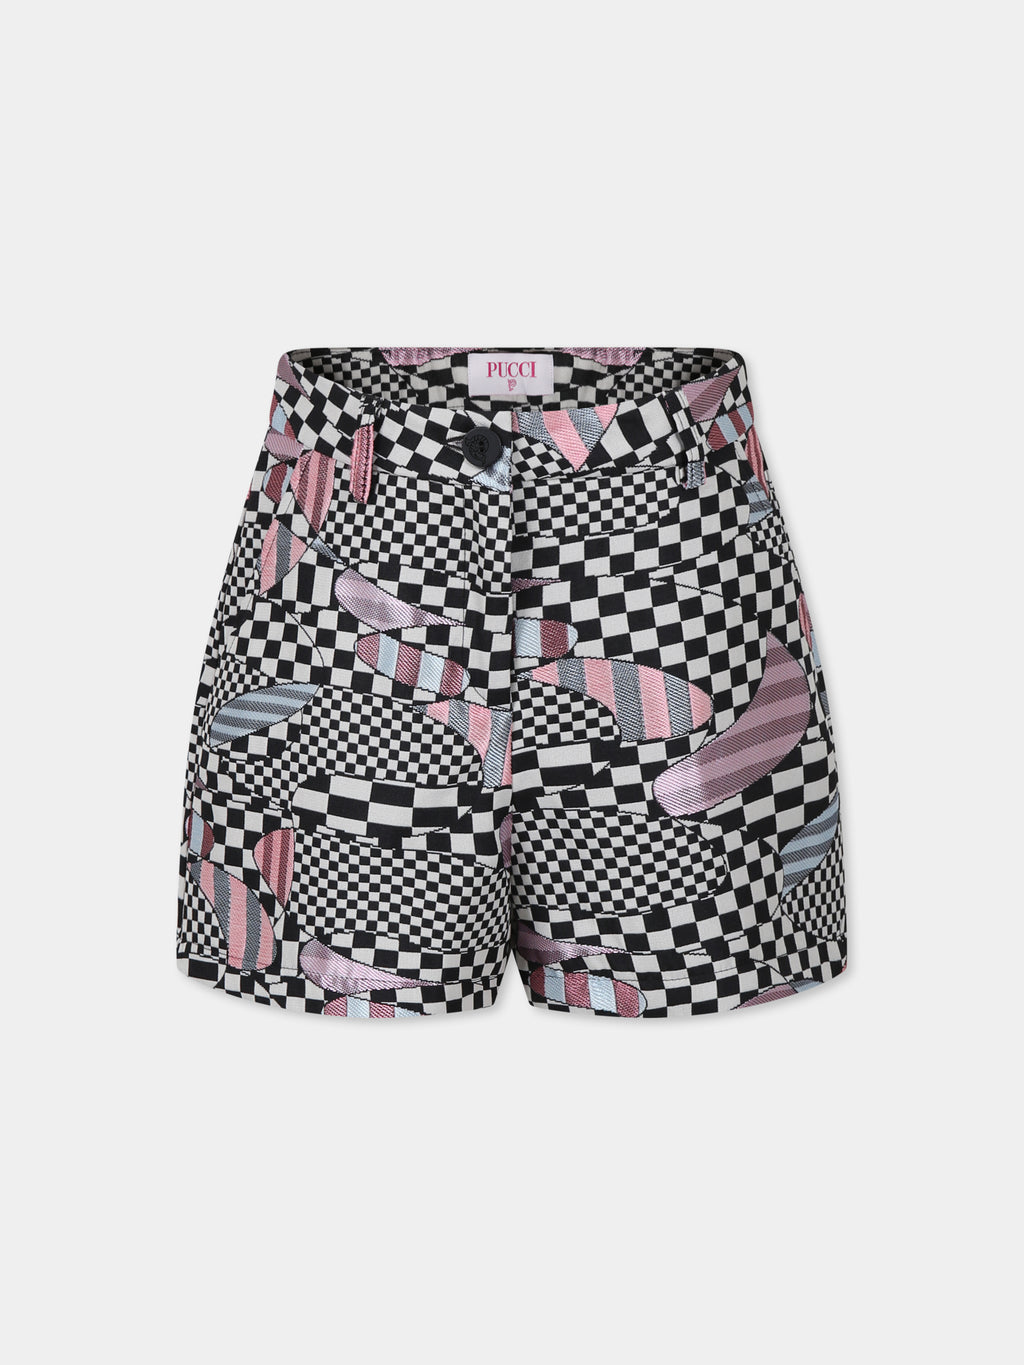 Black shorts for girl with abstract print